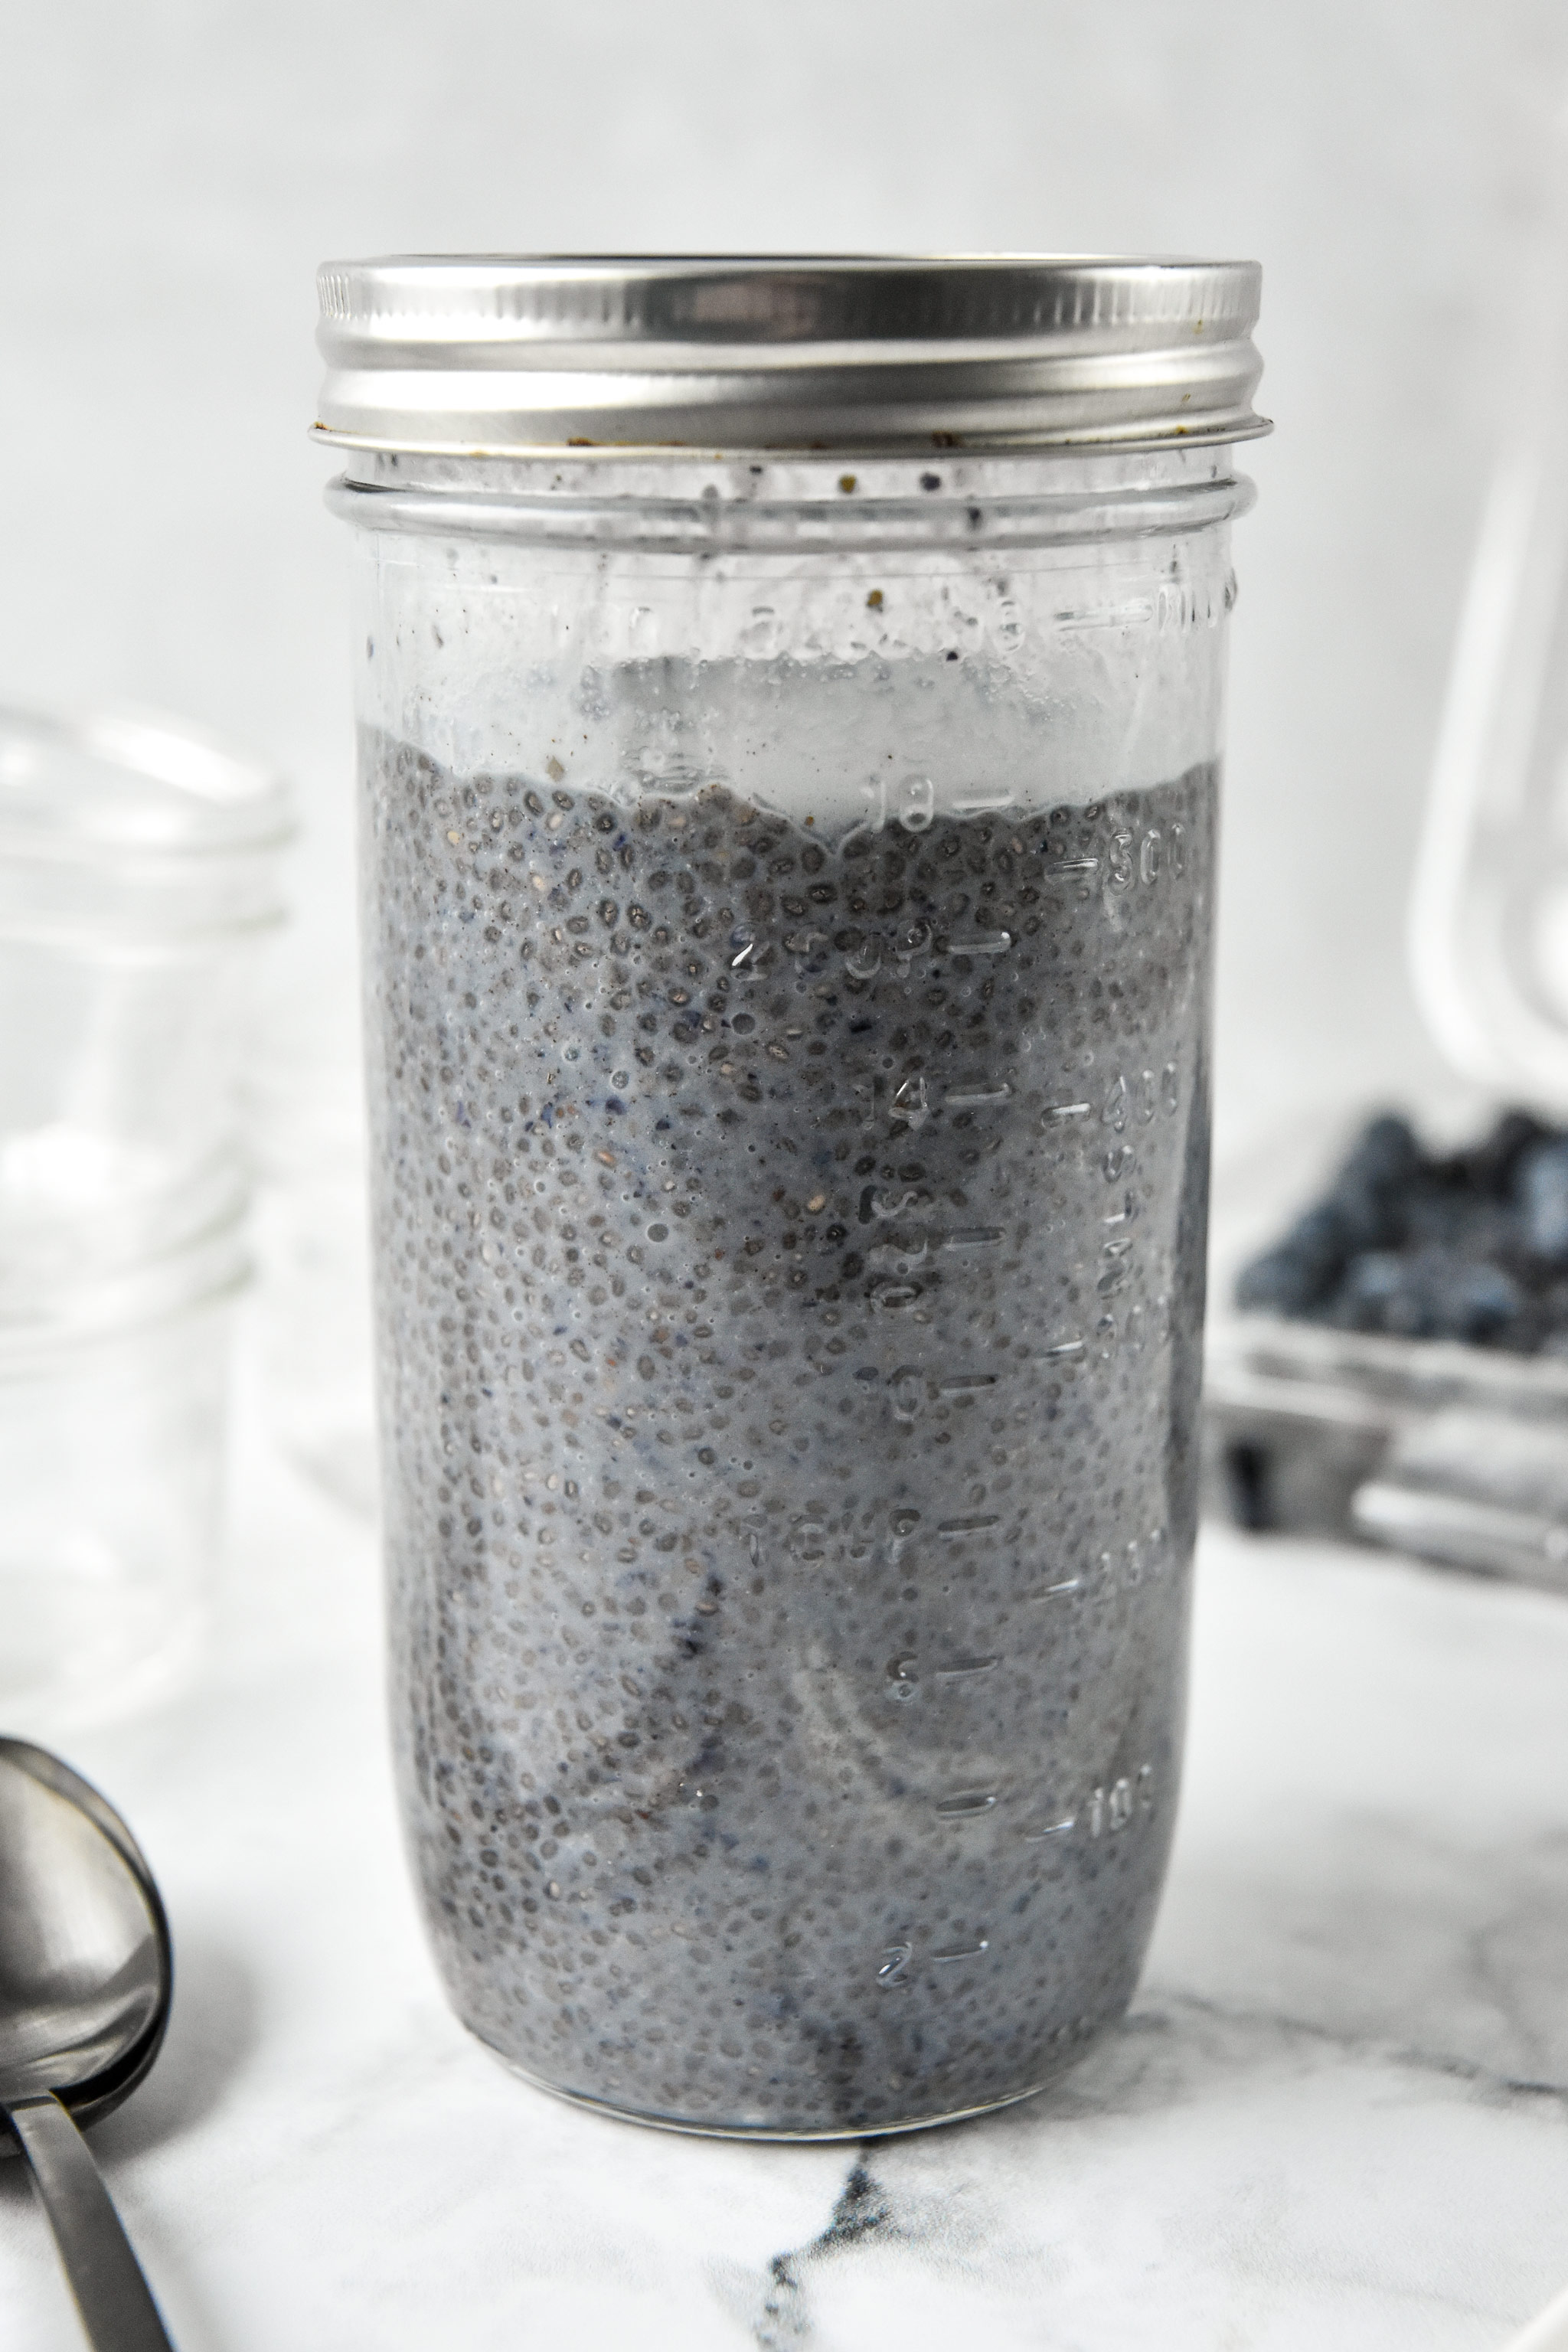 blueberry spice chia seed pudding after being refrigerated for 6 hours